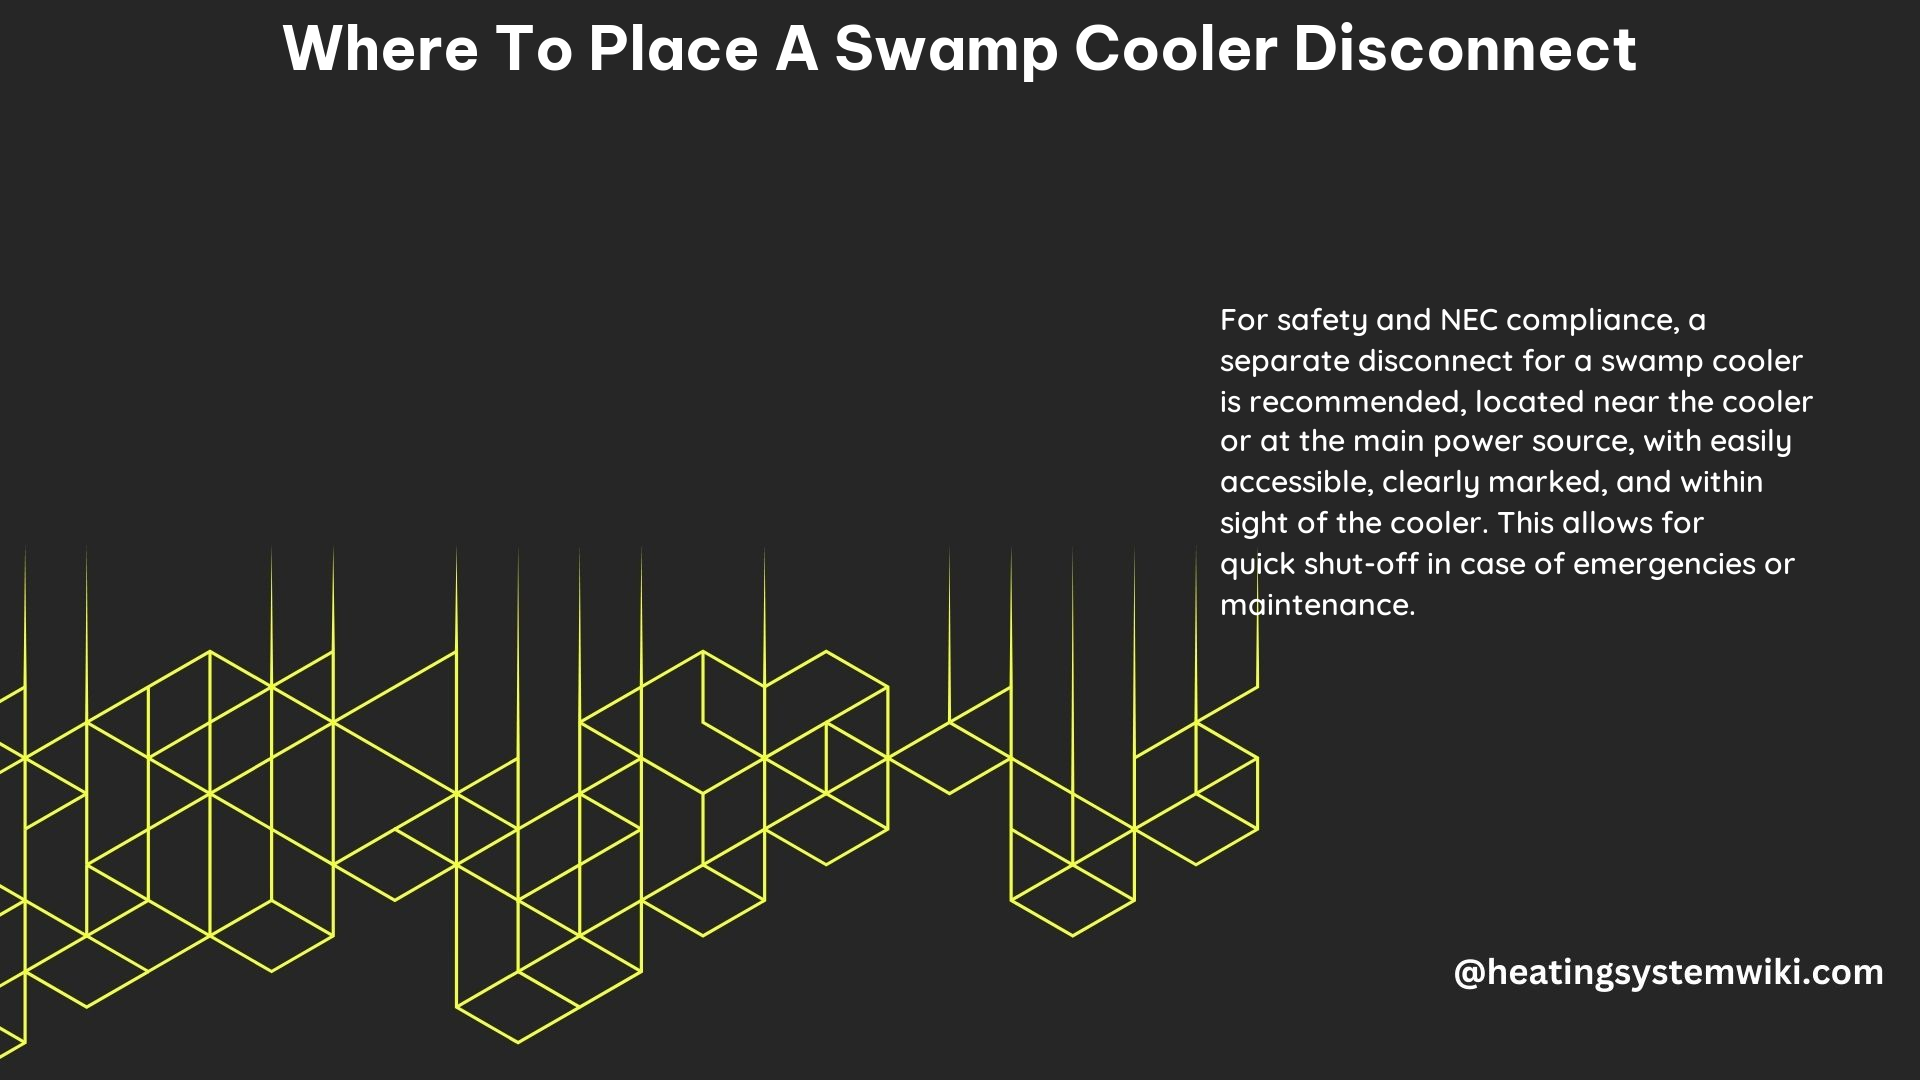 Where to Place a Swamp Cooler Disconnect